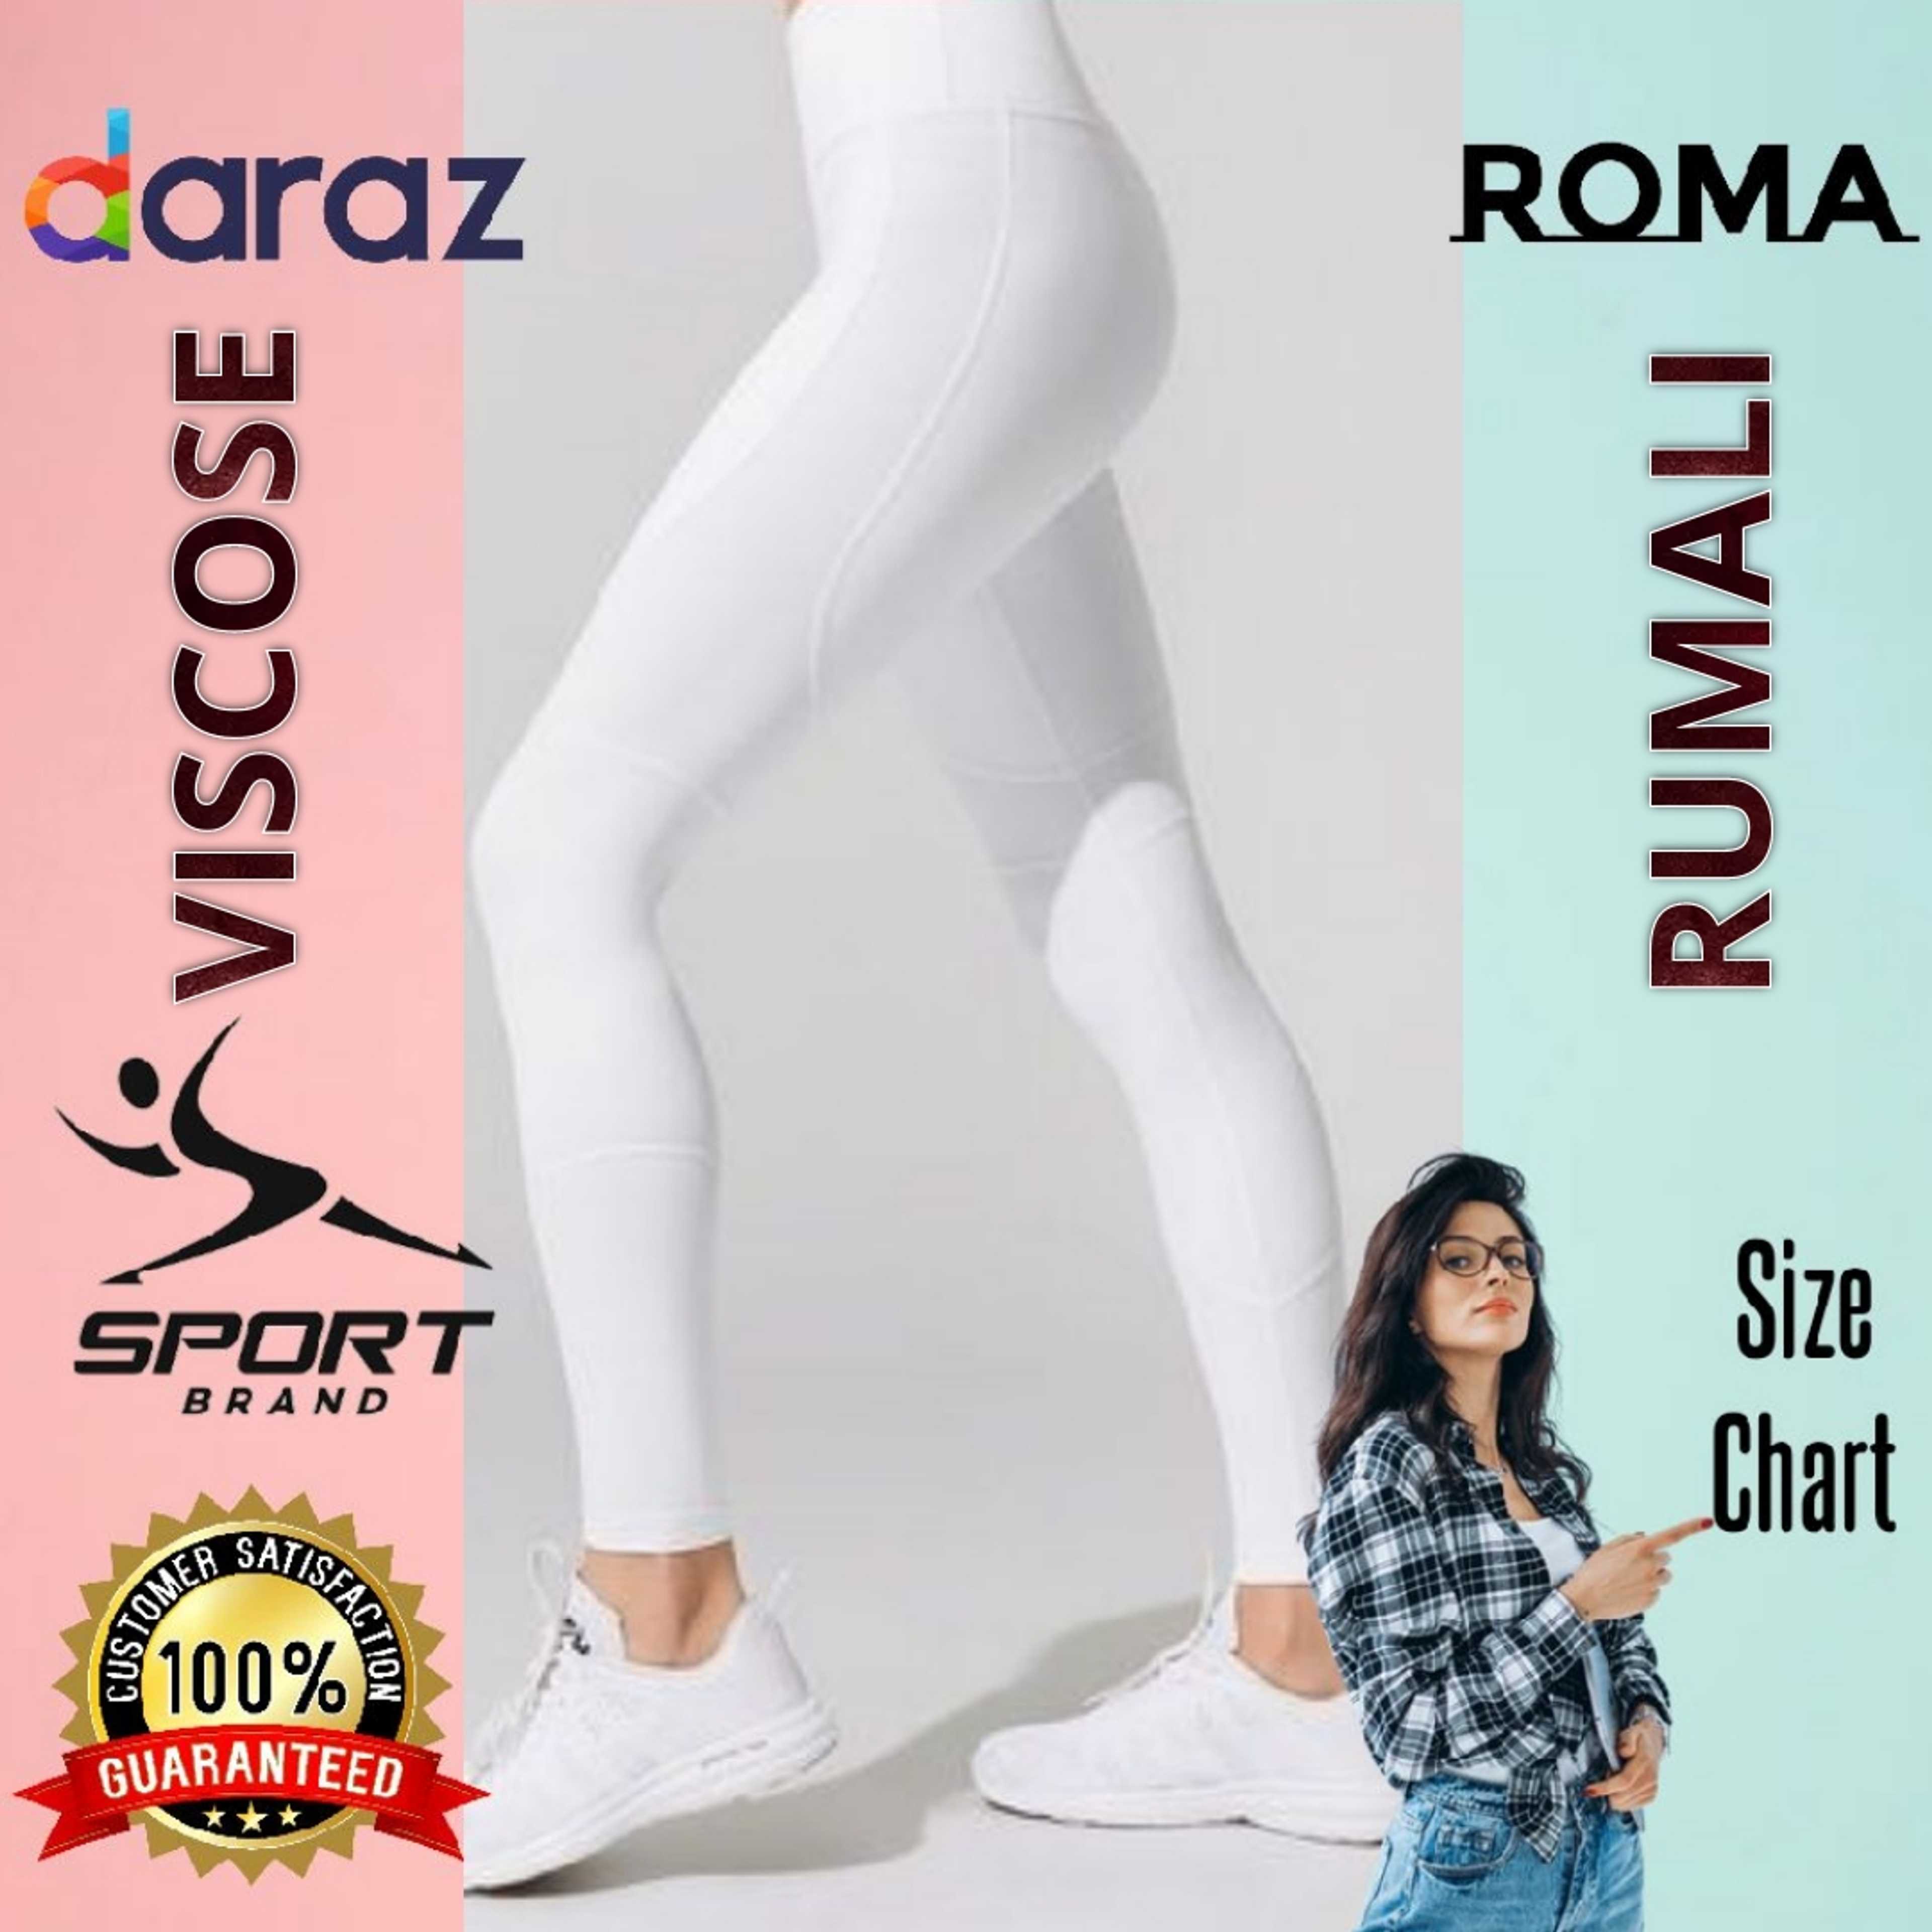 ROMA Store Premium Viscose High Stretchable Tights for Women